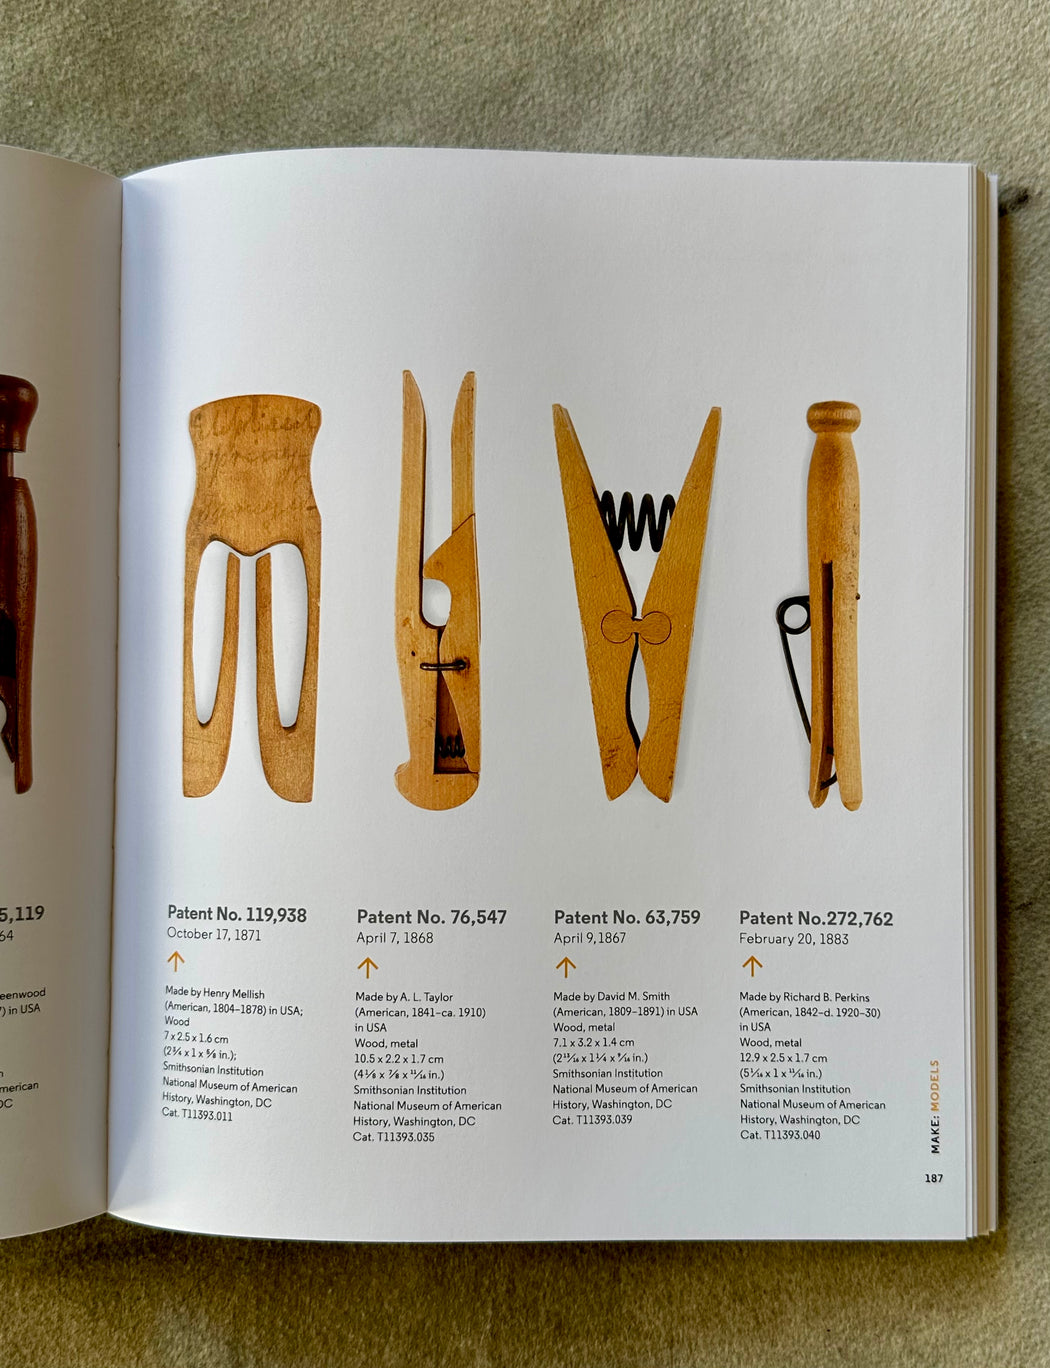 "Tools: Extending Our Reach" by The Cooper Hewitt Museum